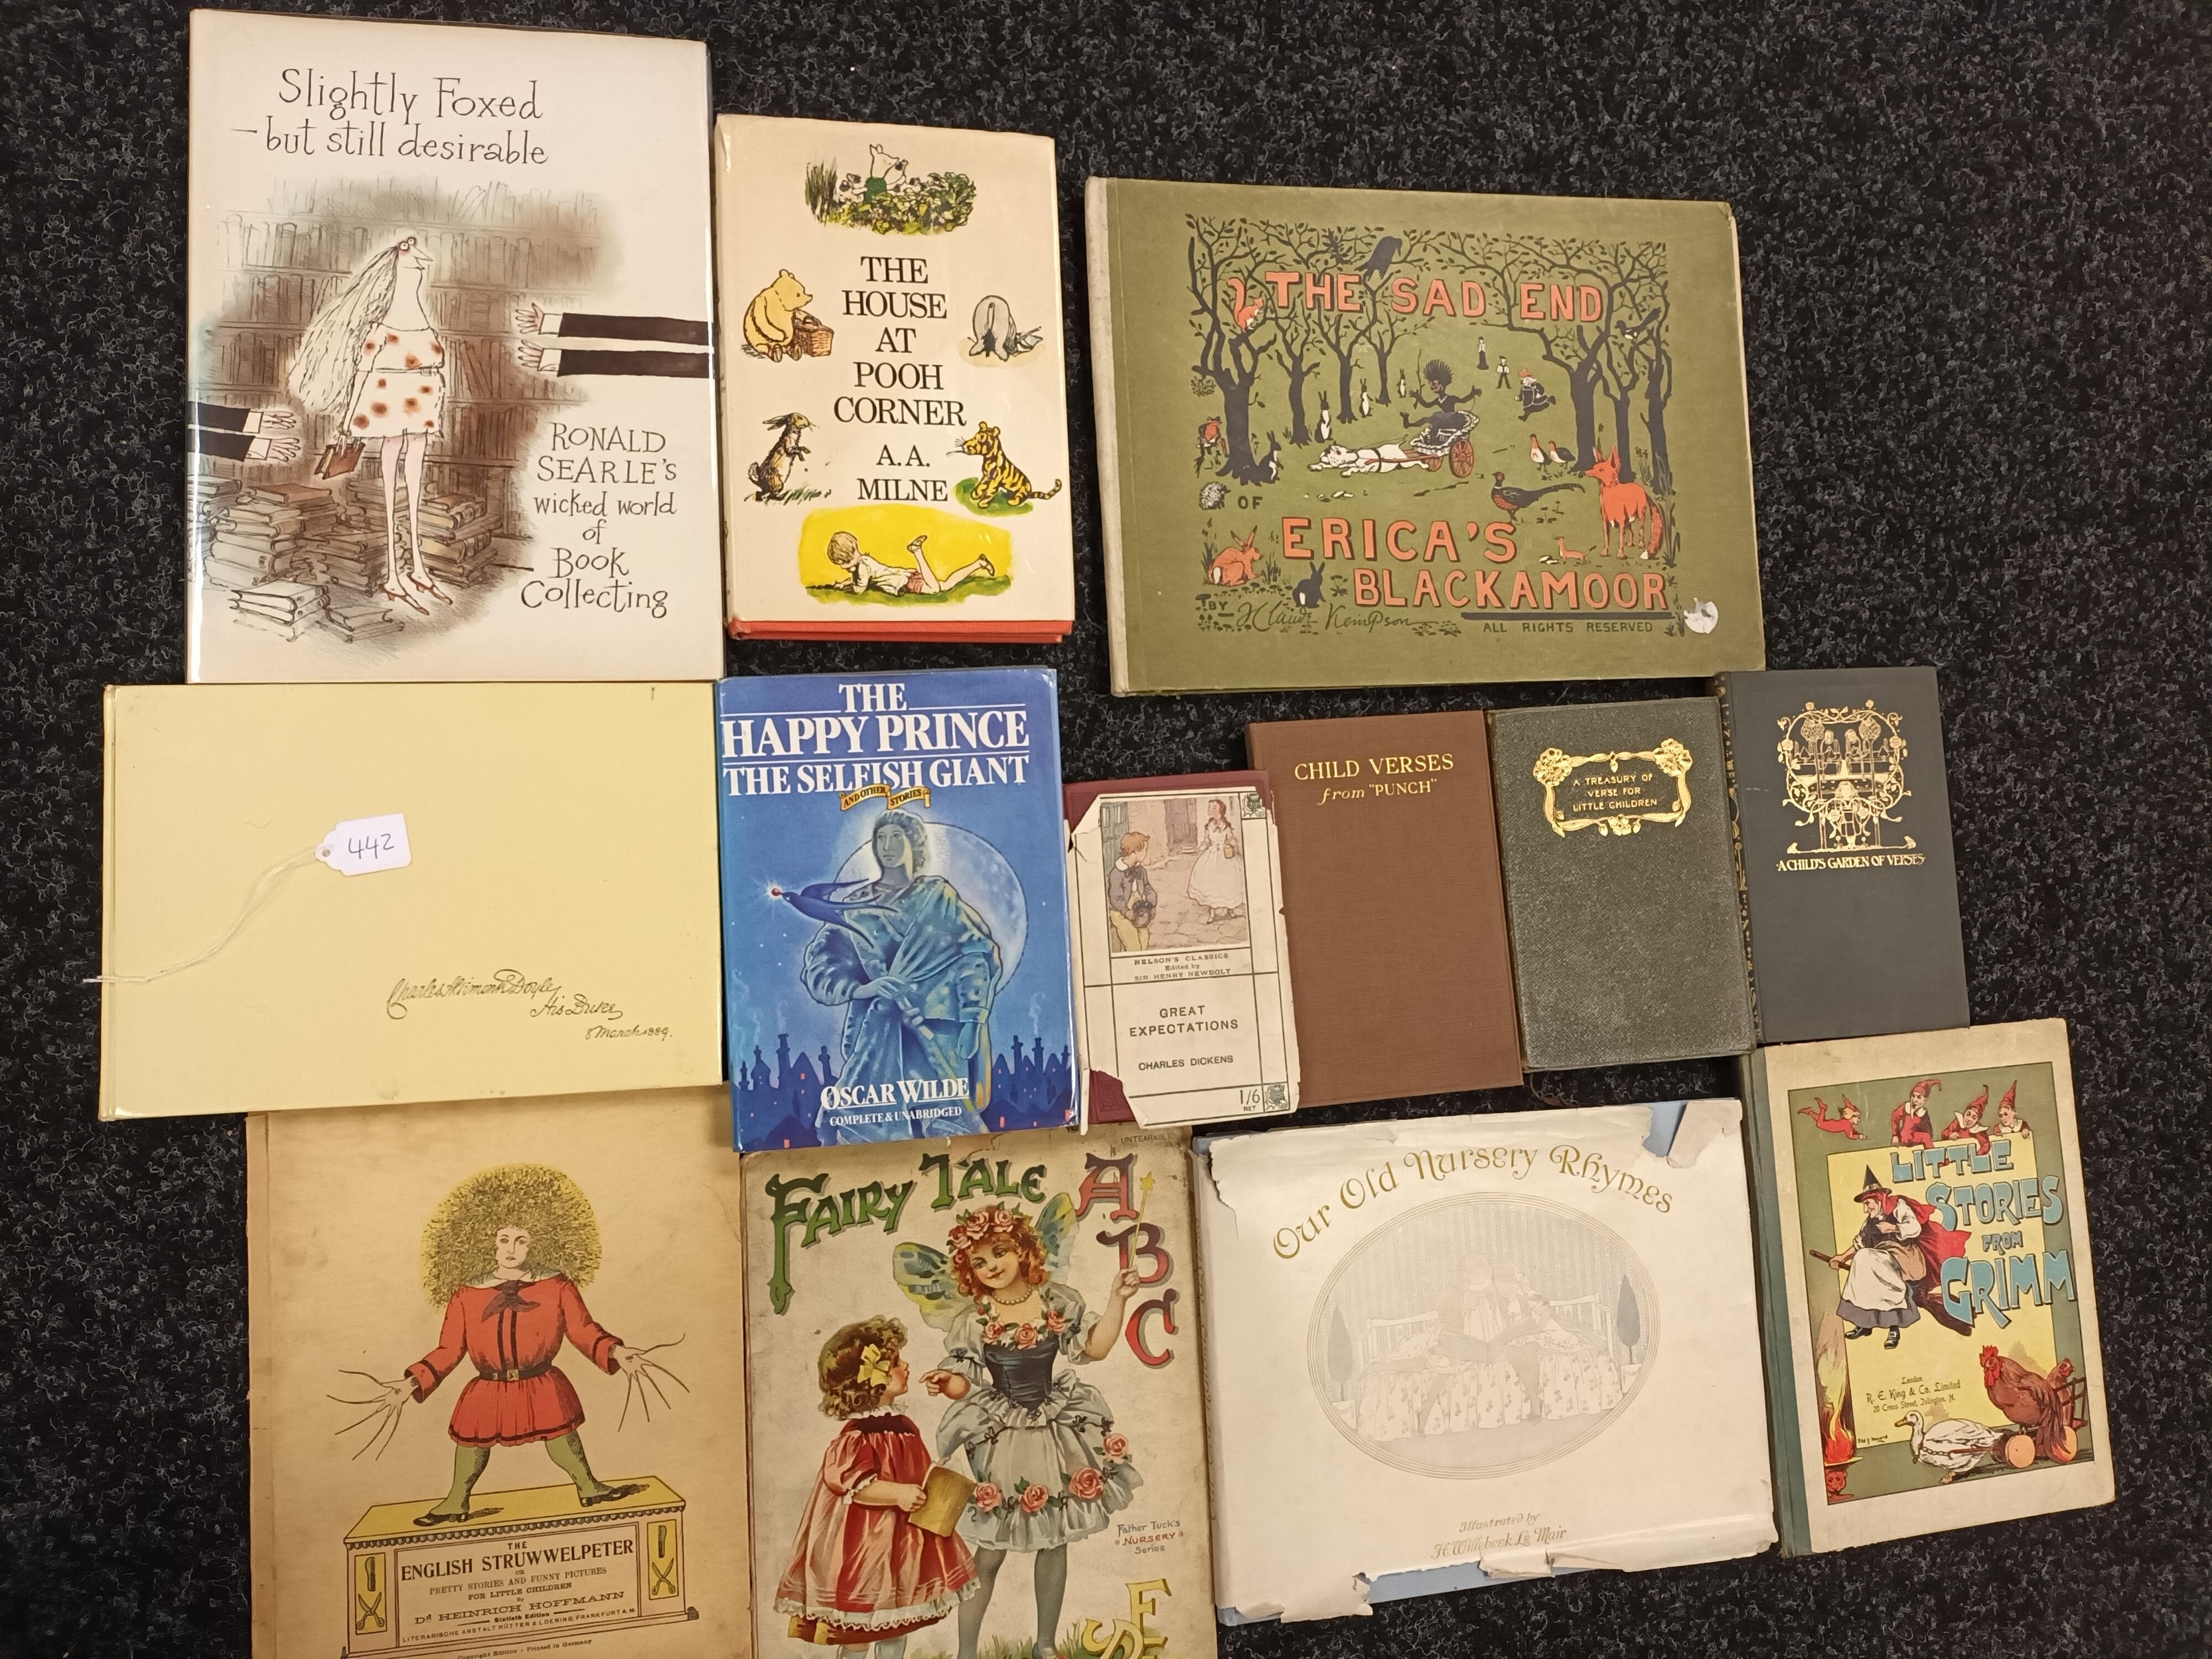 Various vintage children's books to include Great Expectations by Charles Dickens, Child verses from